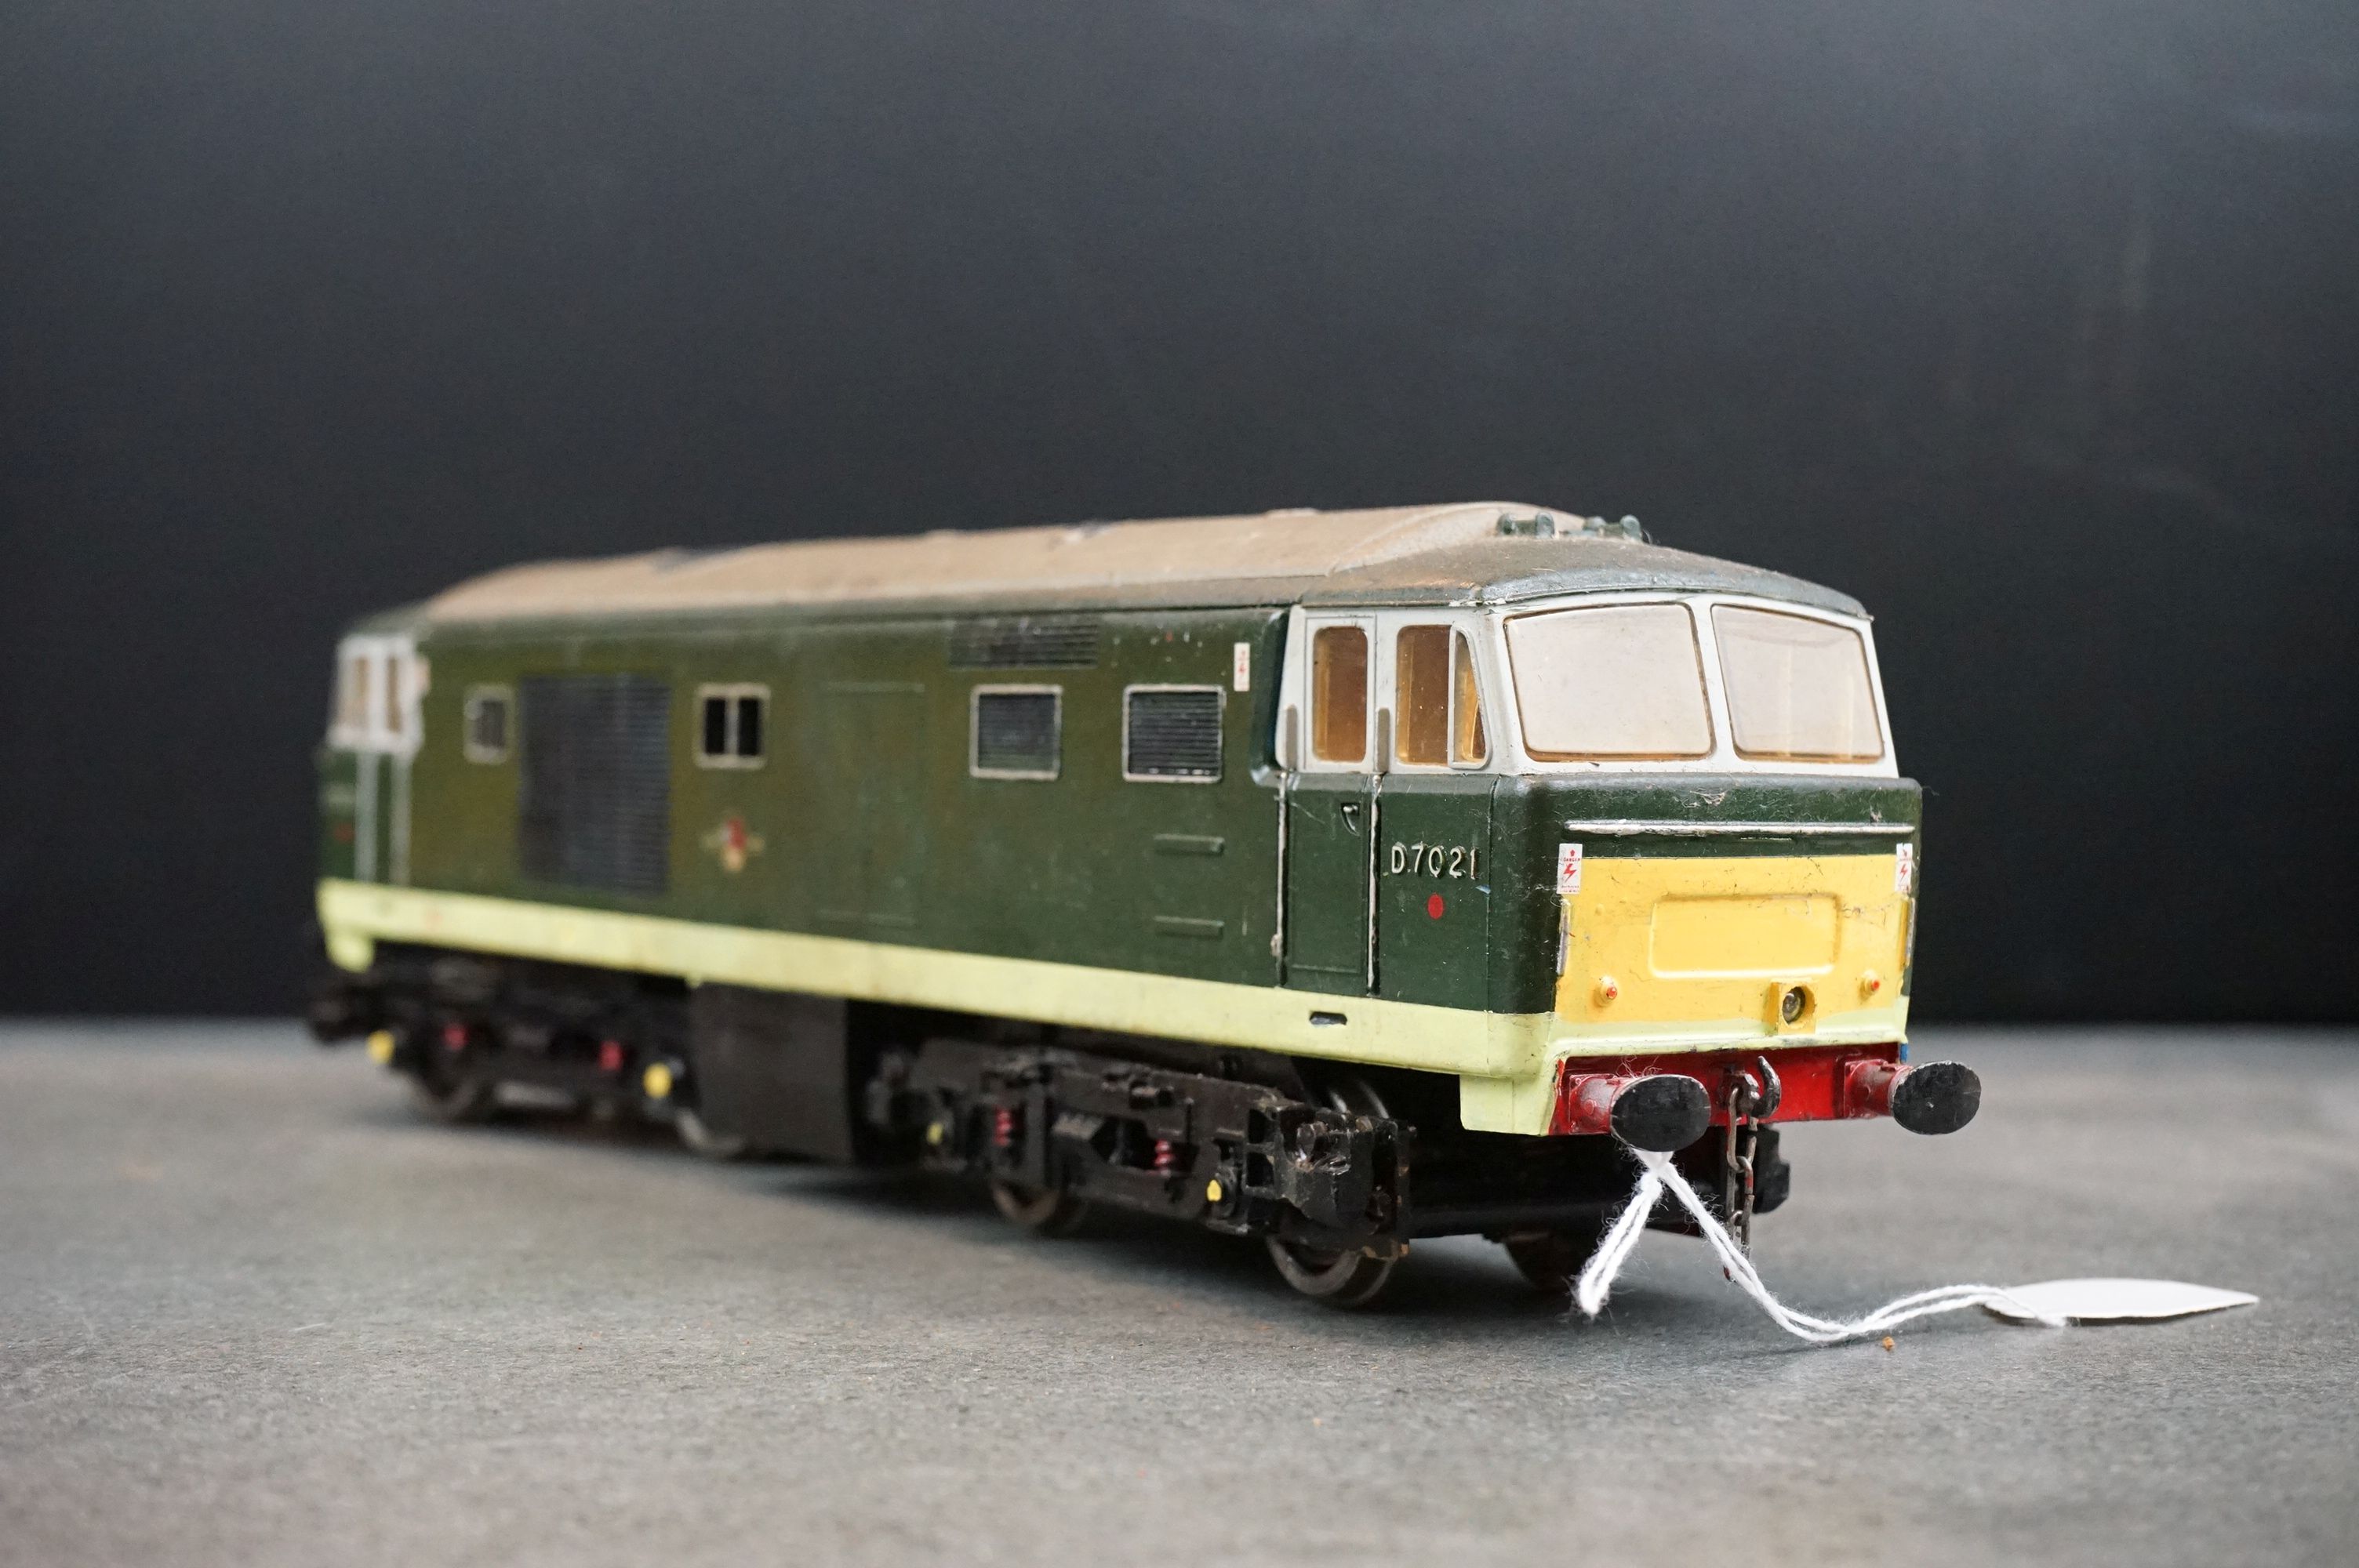 Three kit built O gauge Diesel locomotives in BR green livery to include D7043, D7054 & D7021, - Image 15 of 18